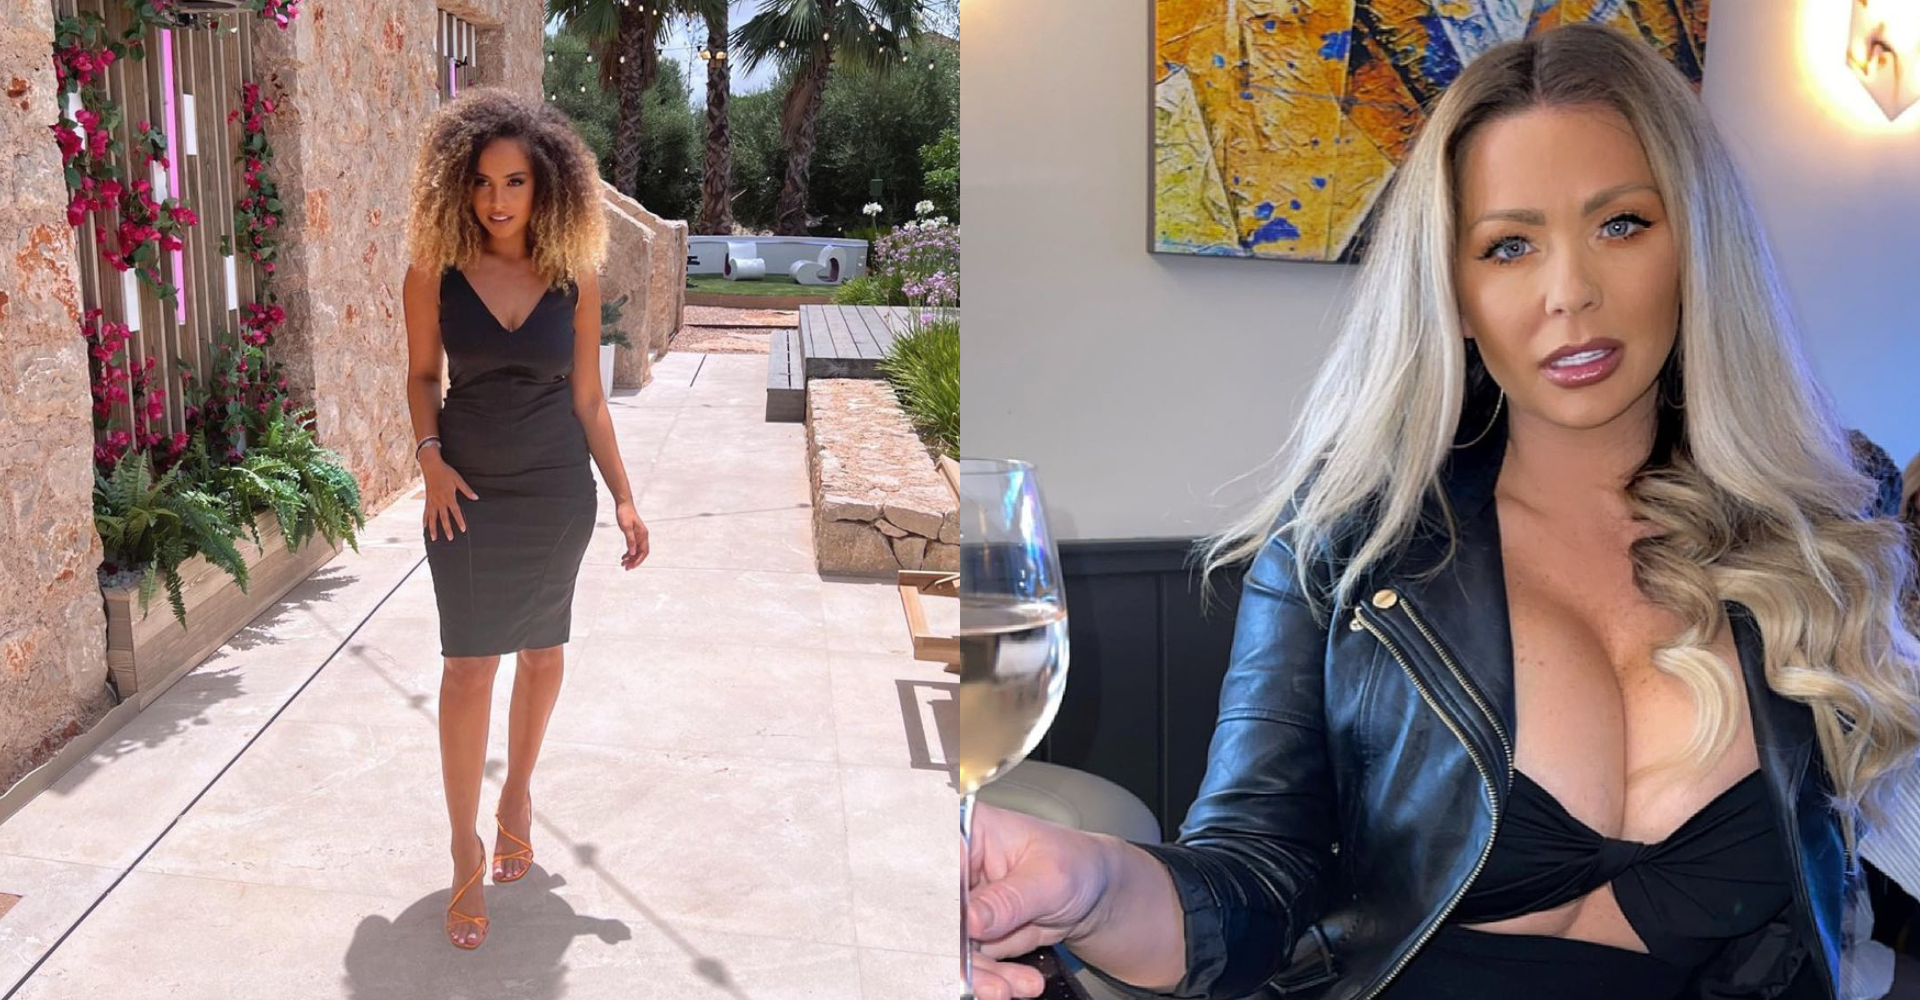 Love Island's Amber Gill Reveals Secret Feud With Nicola McLean